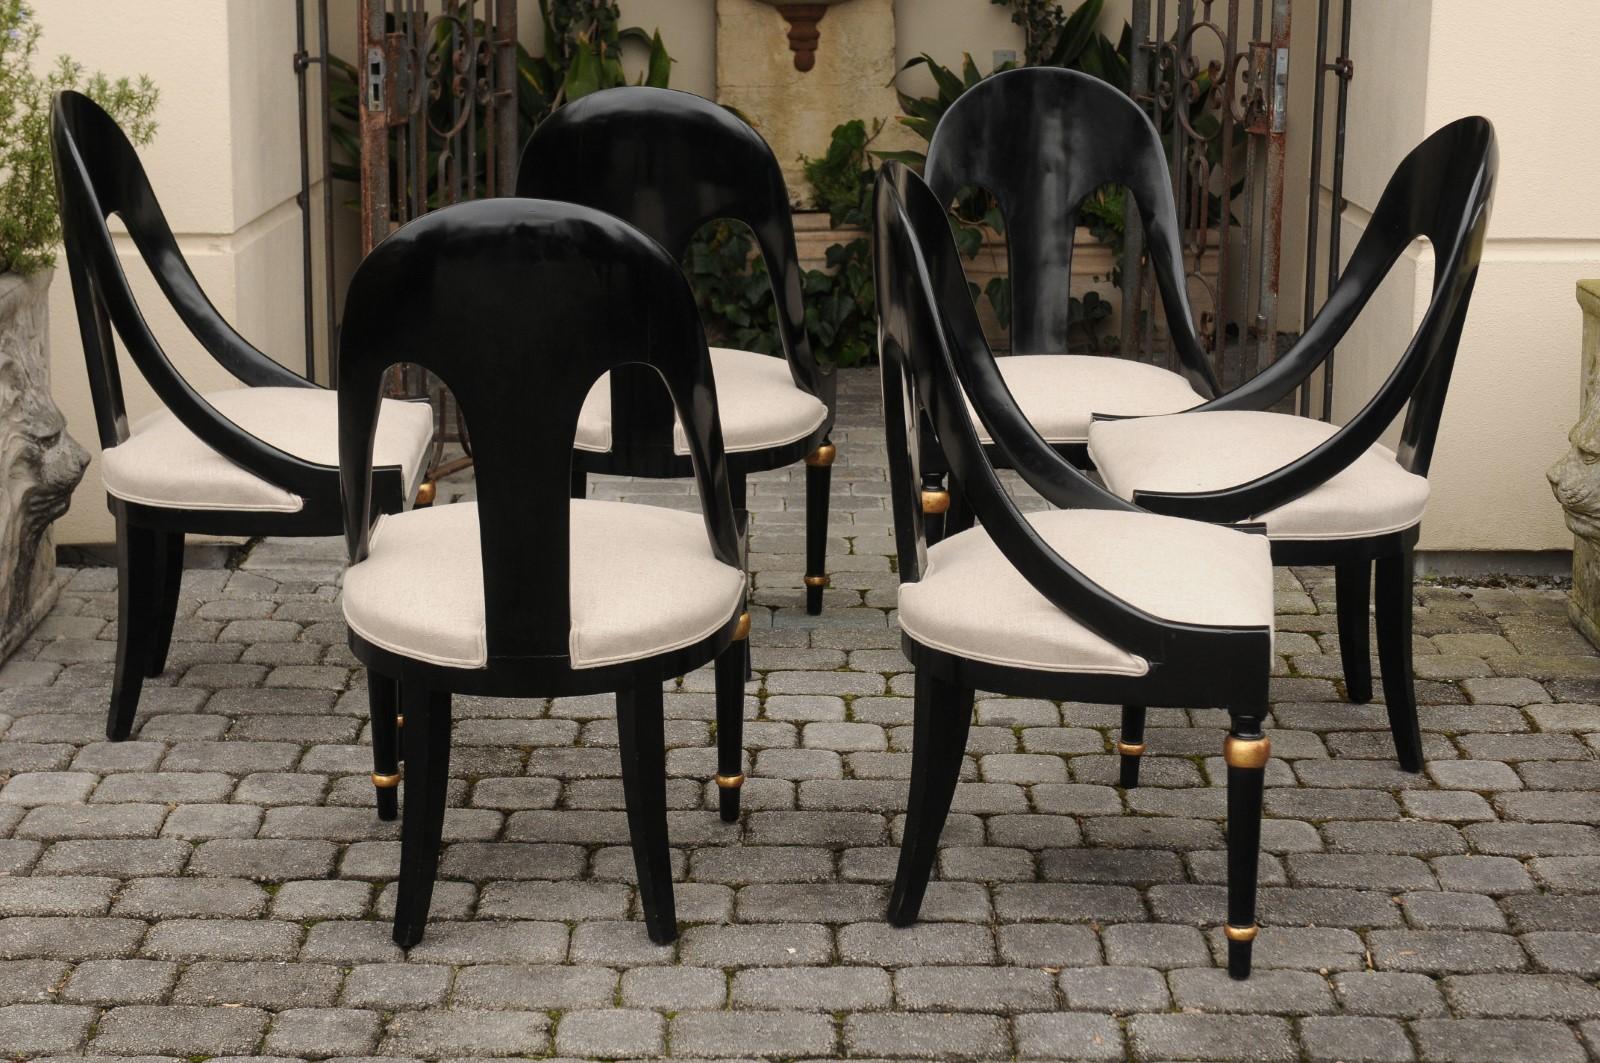 Set of Six Vintage Ebonized Wood Upholstered Spoon Back Chairs with Gilt Accents 1